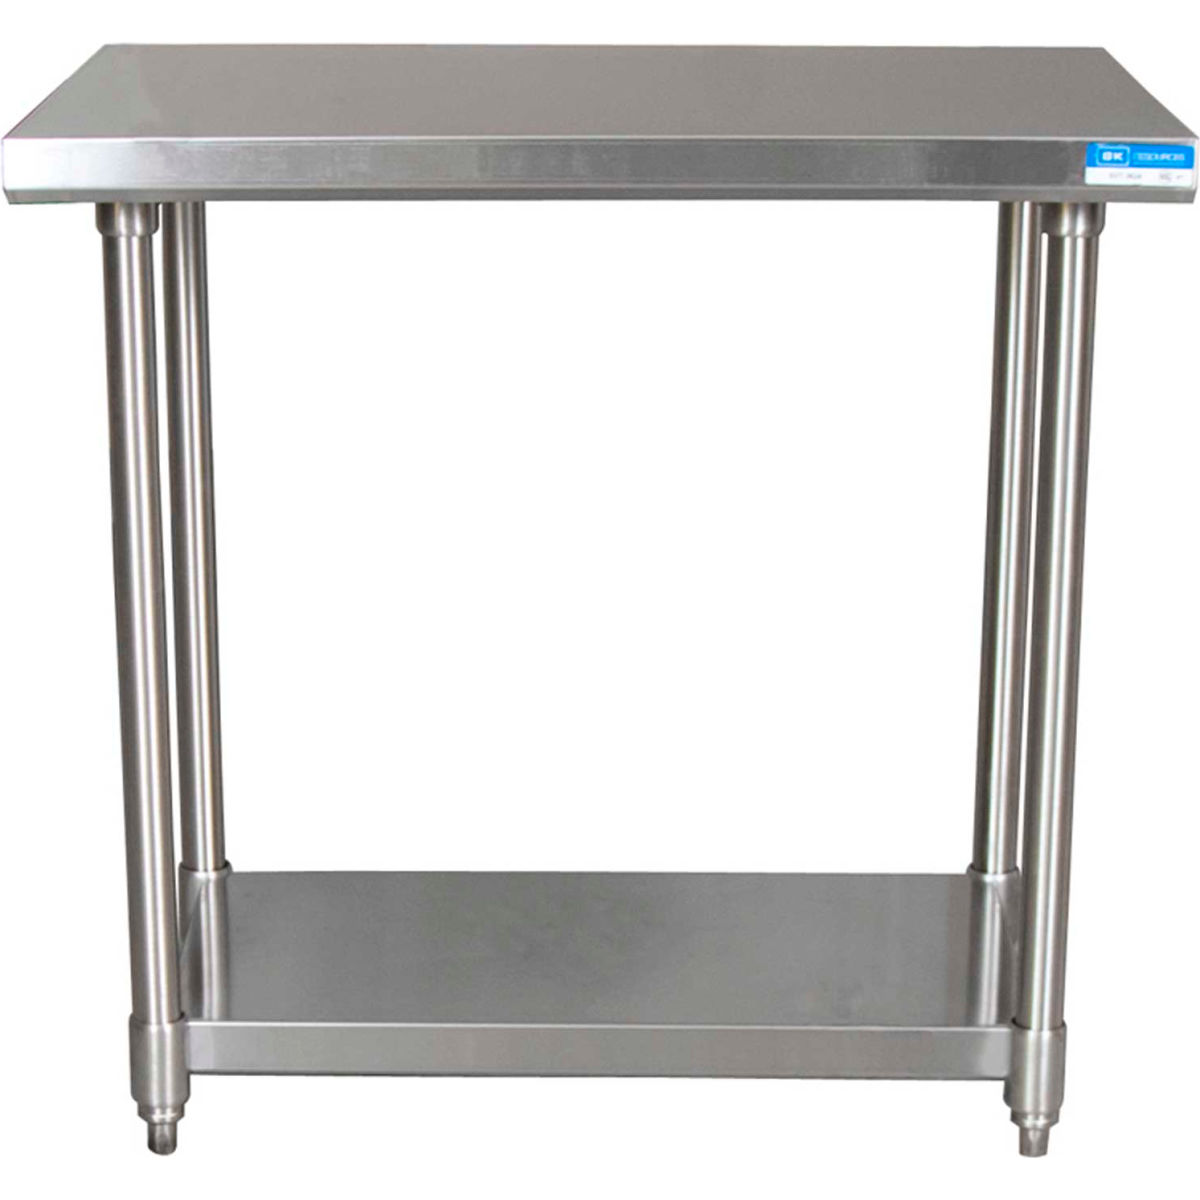 Picture of BK Resources B1516251 16 Gauge 304 Series Stainless Workbench with Adjustable Undershelf - 24 x 24 in.